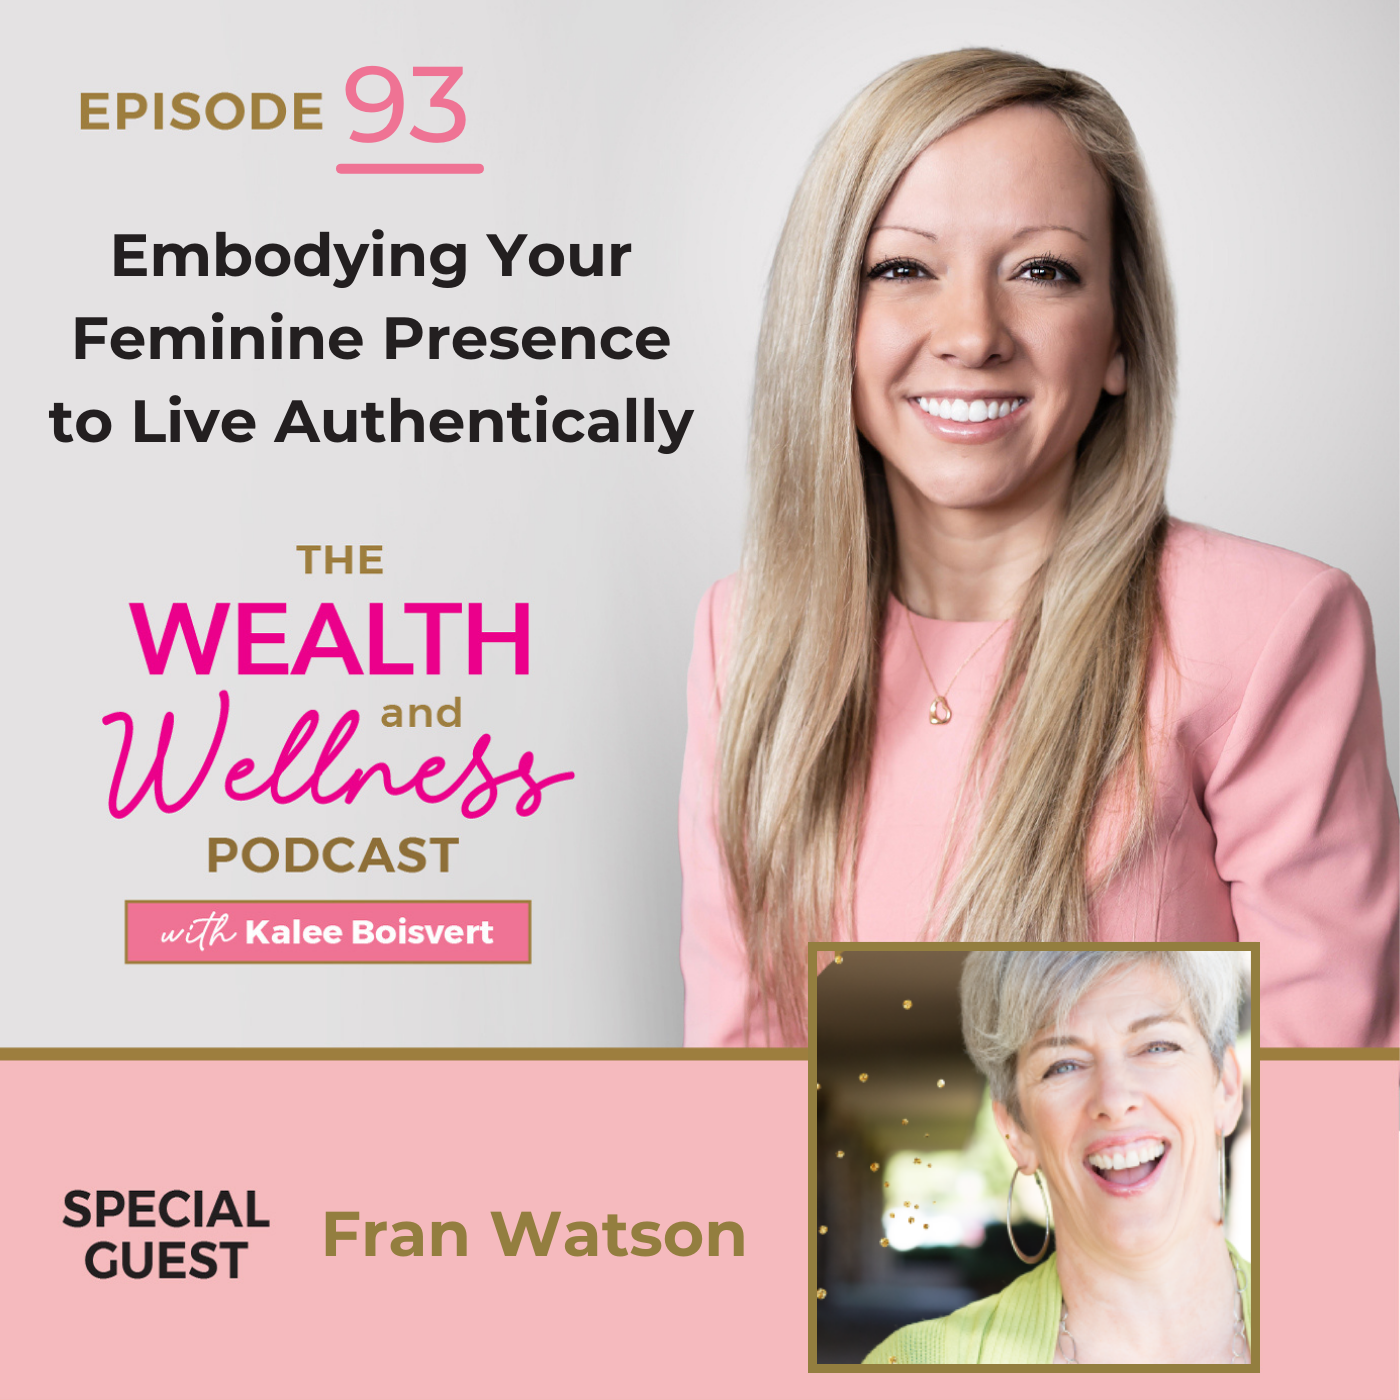 Embodying Your Feminine Presence to Live Authentically